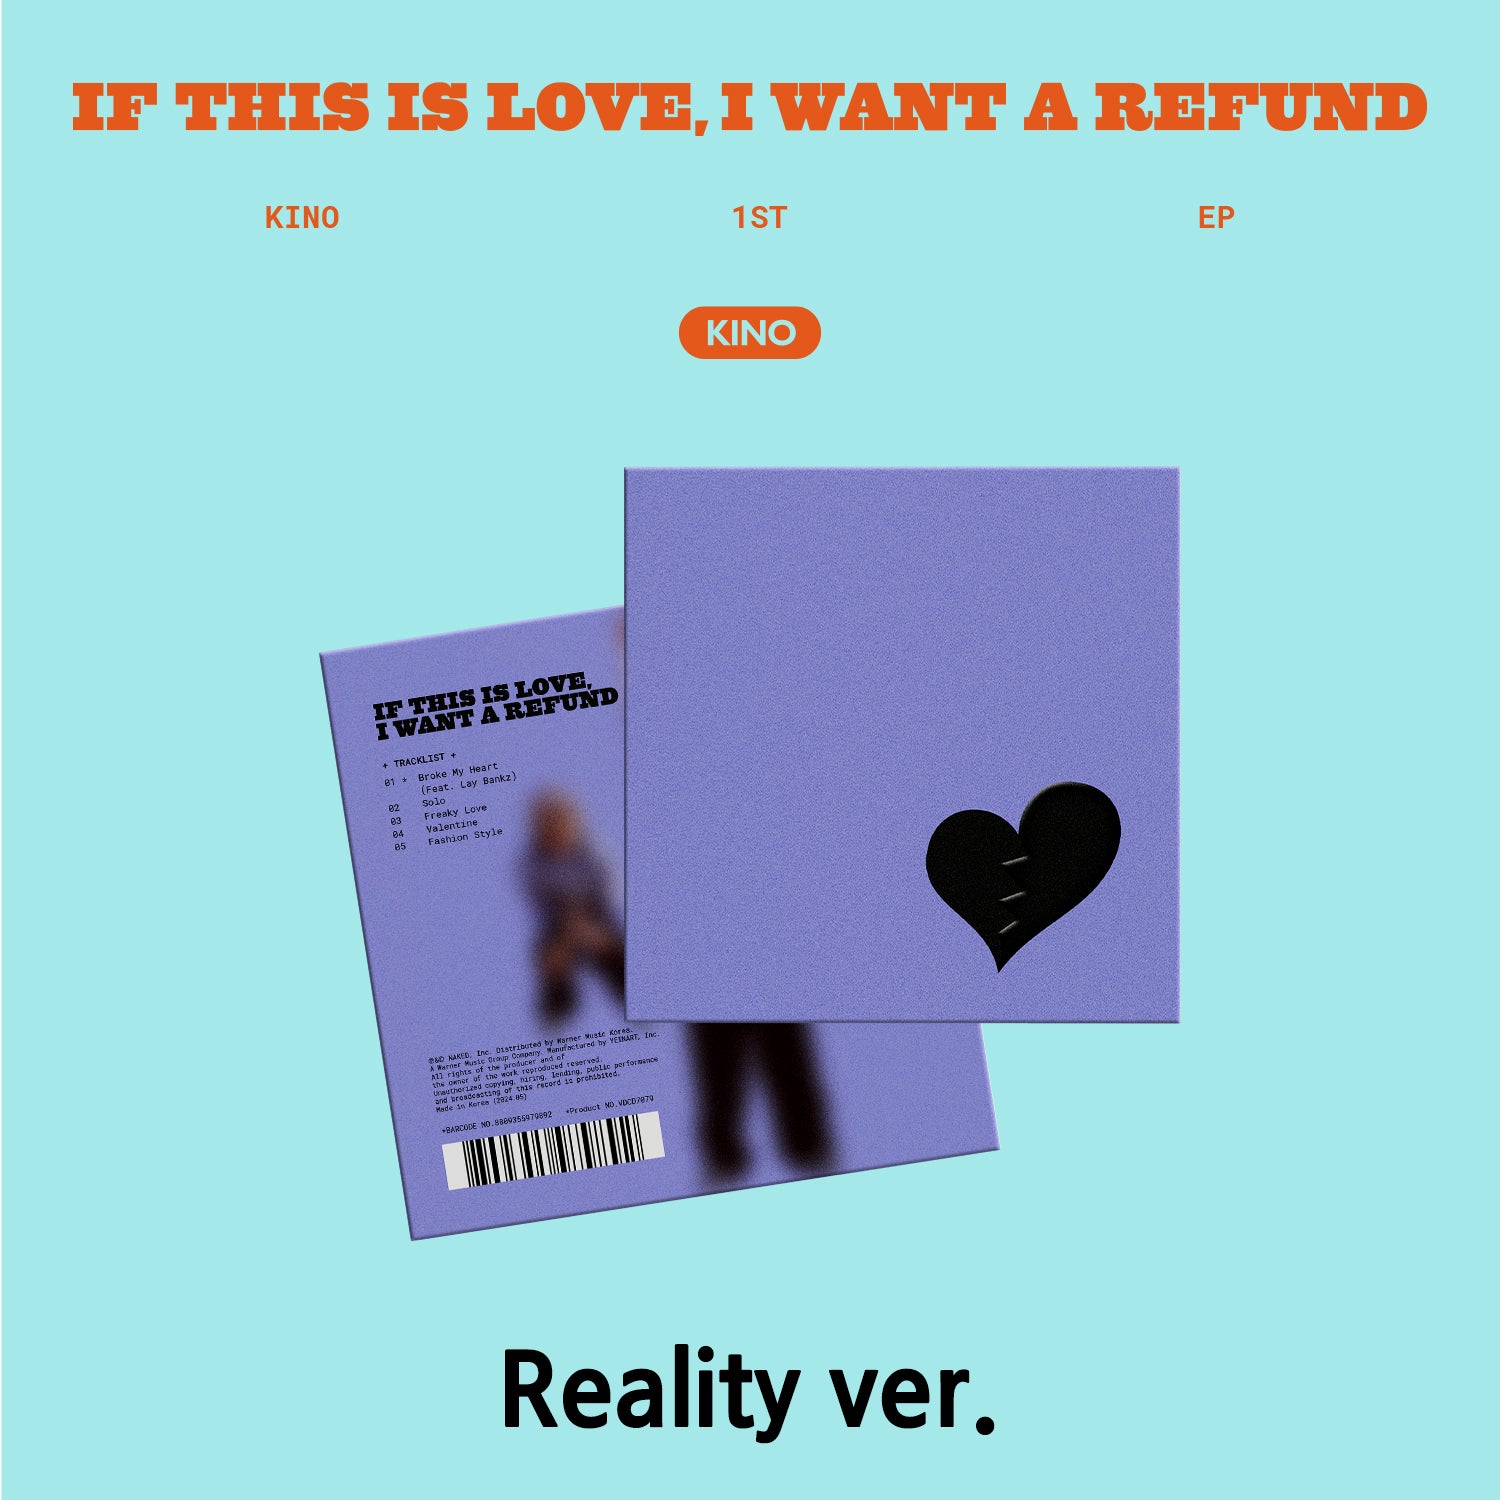 KINO 1ST EP - IF THIS IS LOVE, I WANT A REFUND